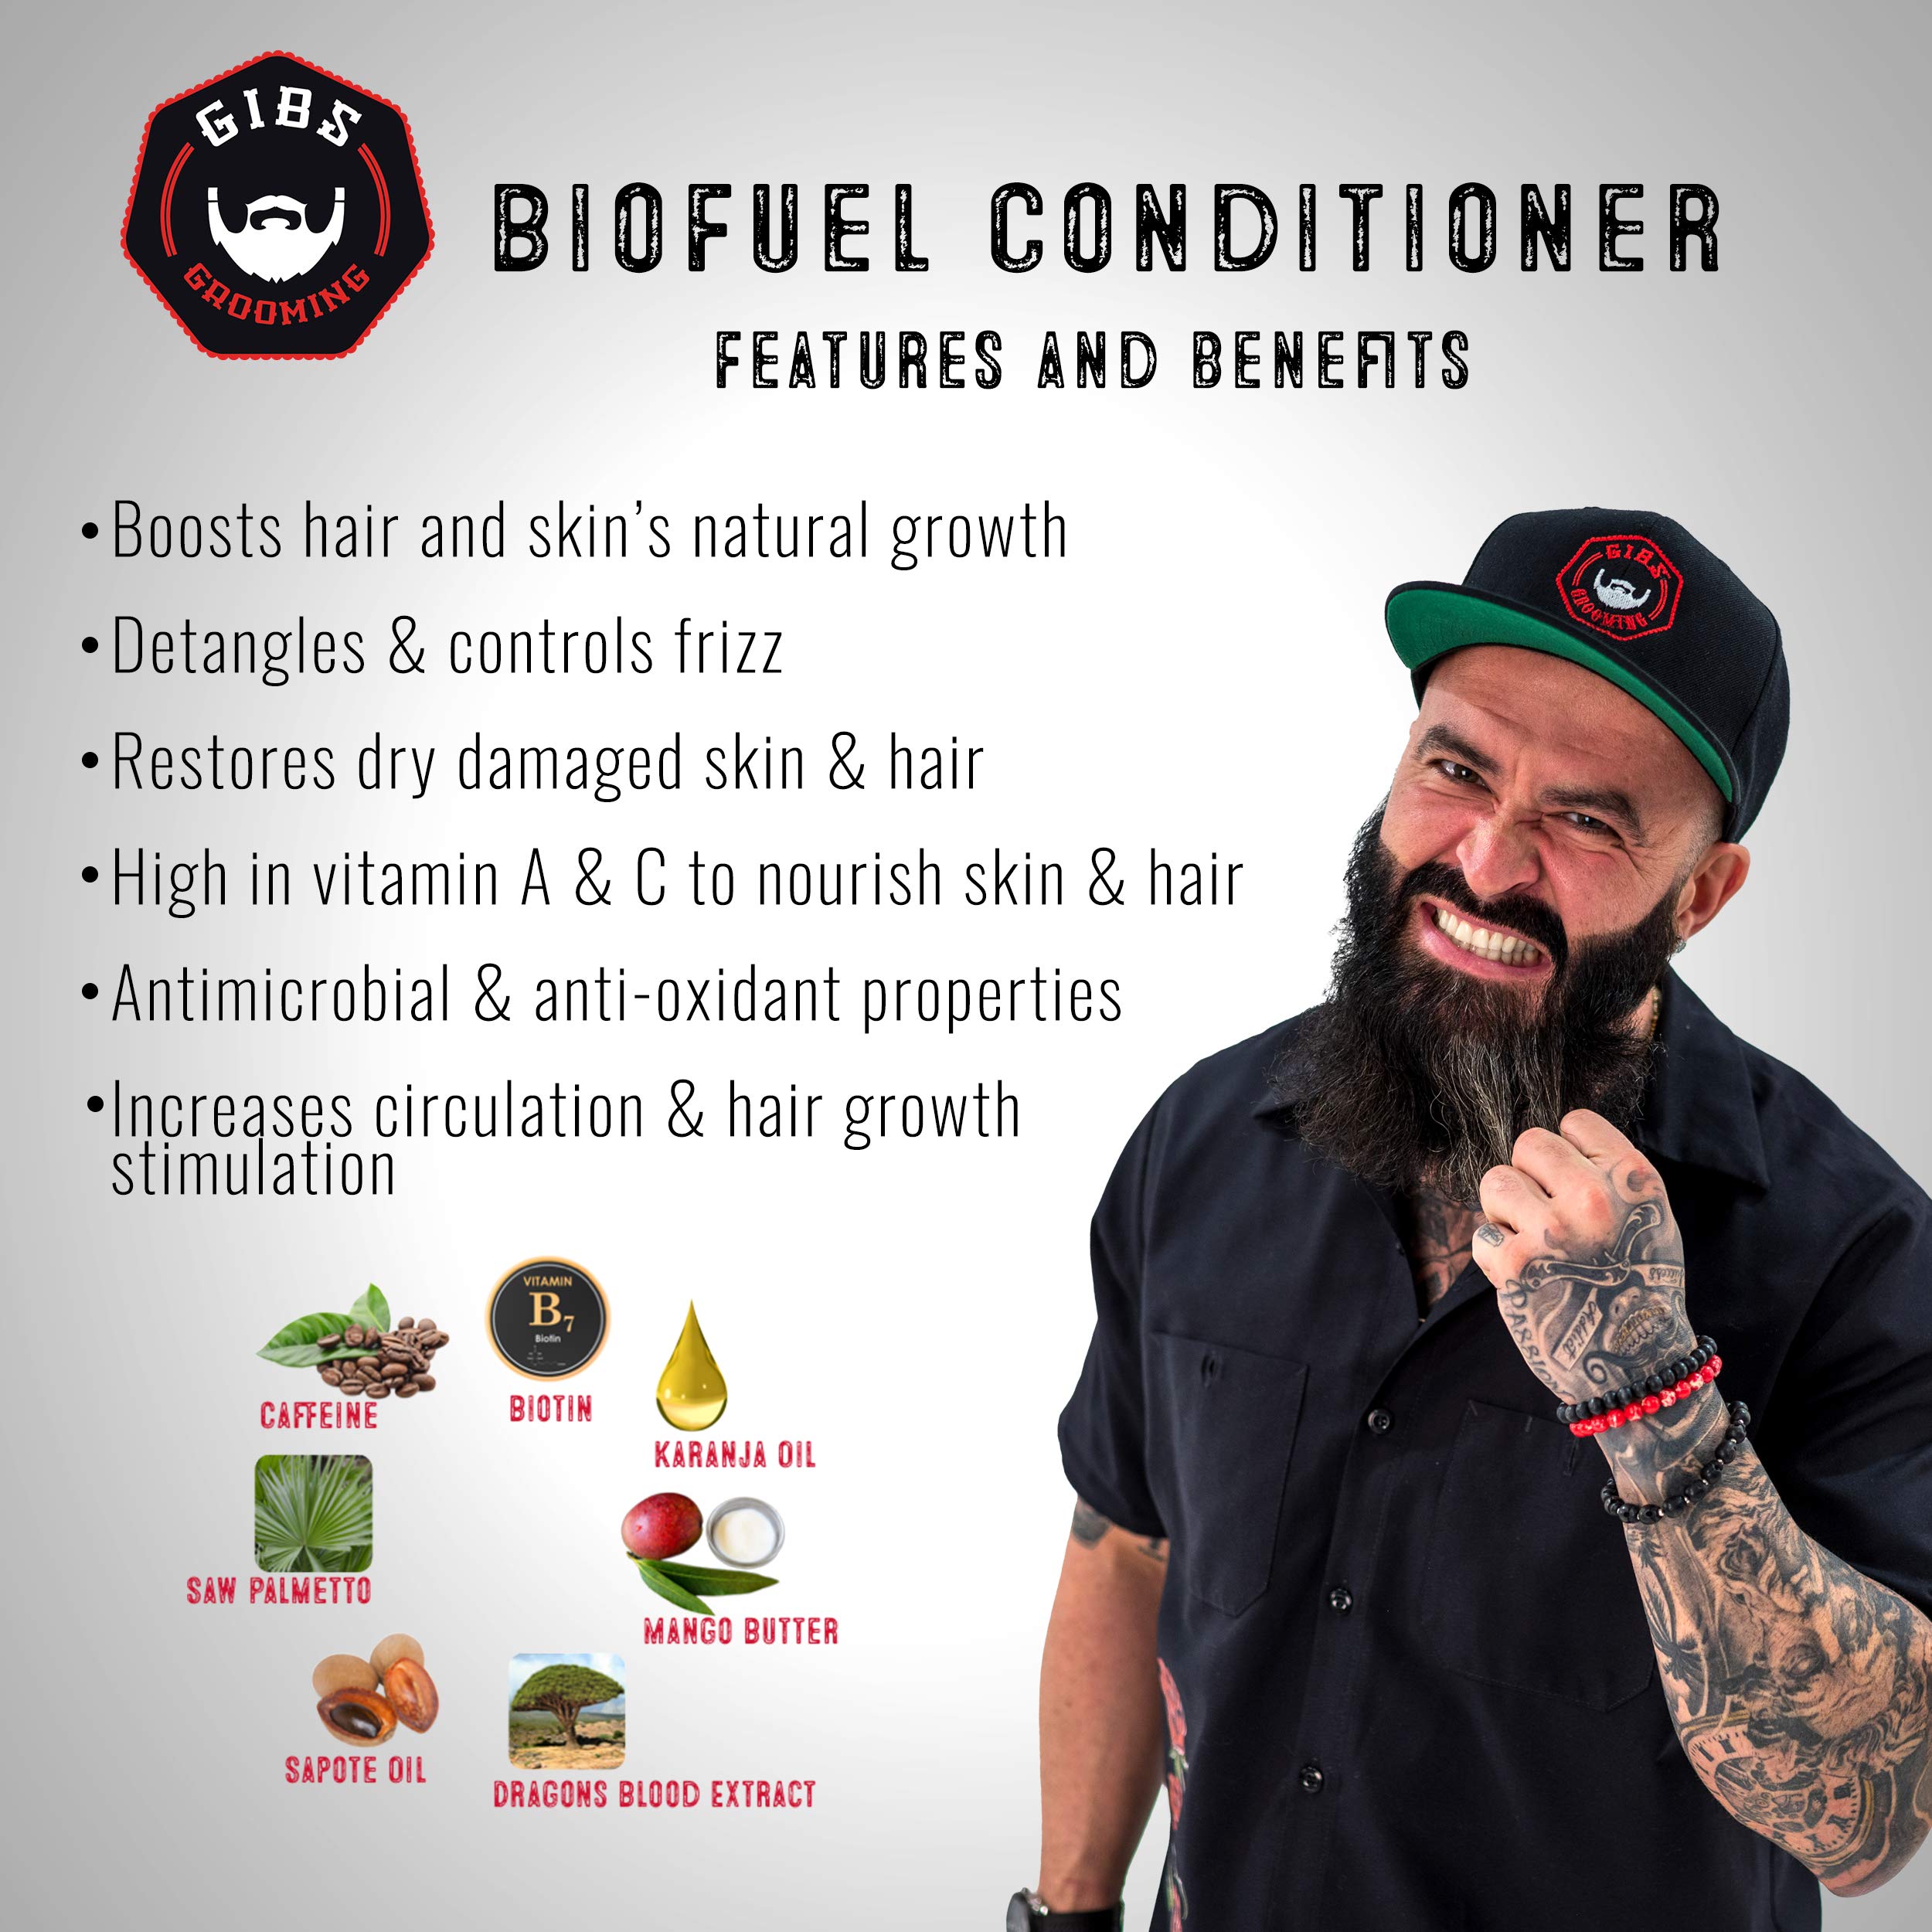 GIBS BioFuel Hair Conditioner For Men - Beard & Hair Conditioner, 3.25 oz